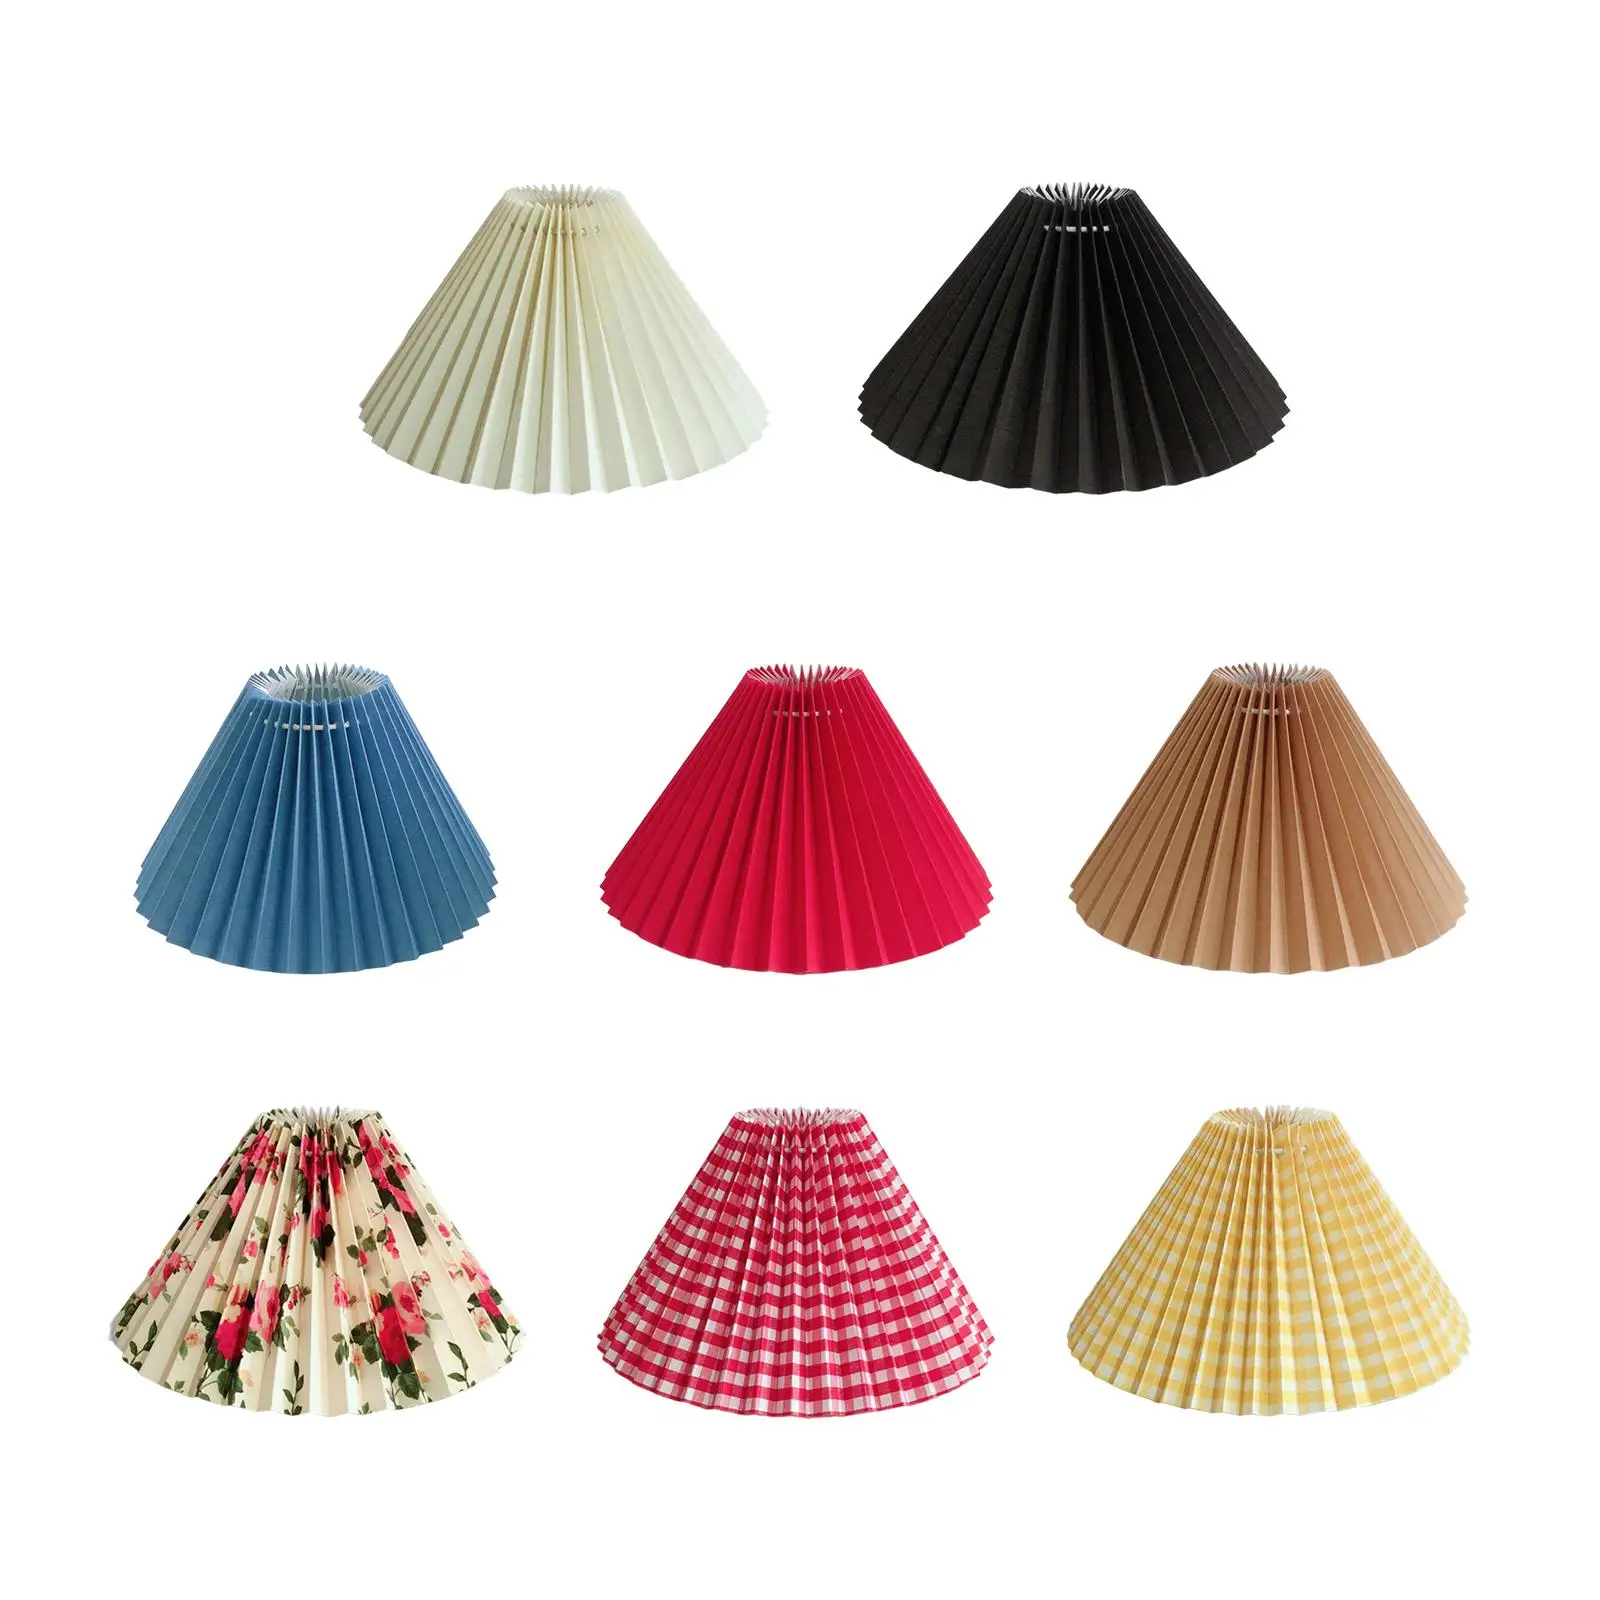 Round Pleated Lampshade Cloth Bedroom Fabric Lamp Shade   Lamp